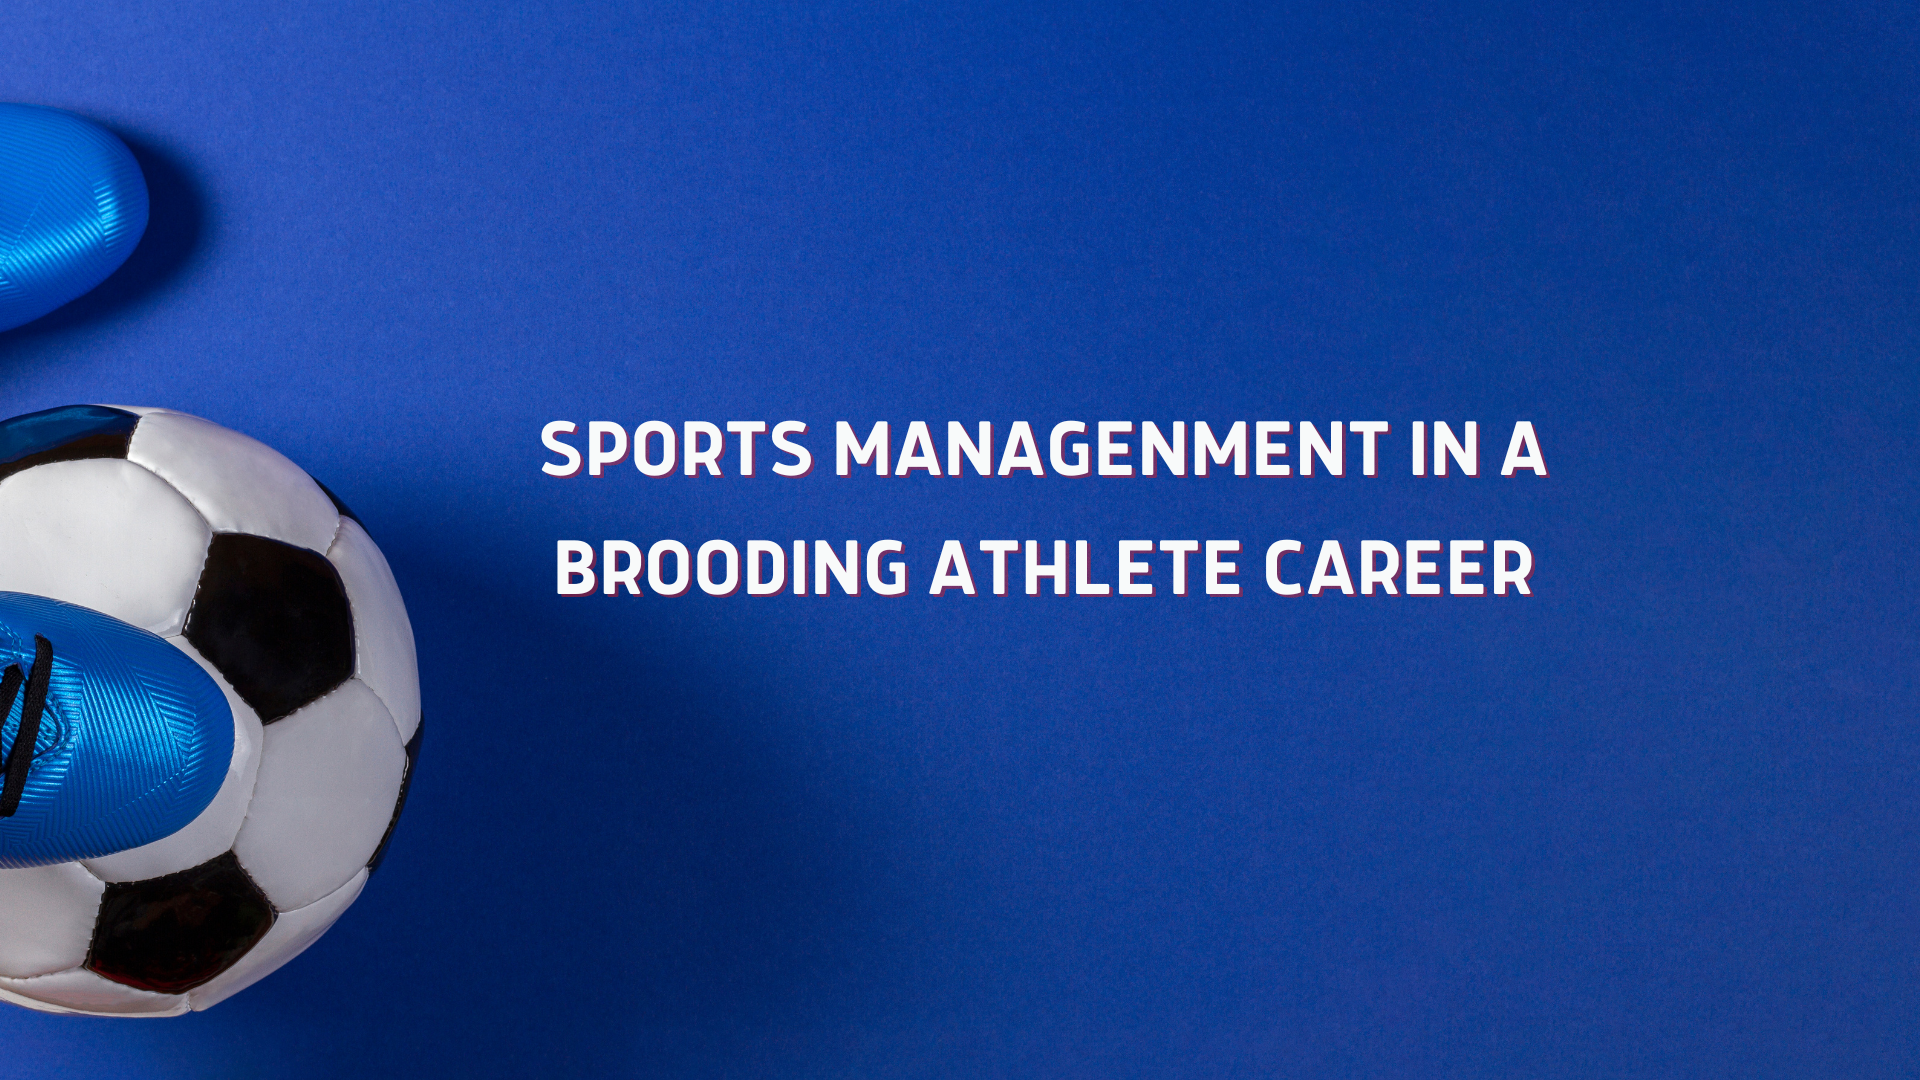 SPORTS MANAGENMENT IN A BROODING ATHLETE CAREER.